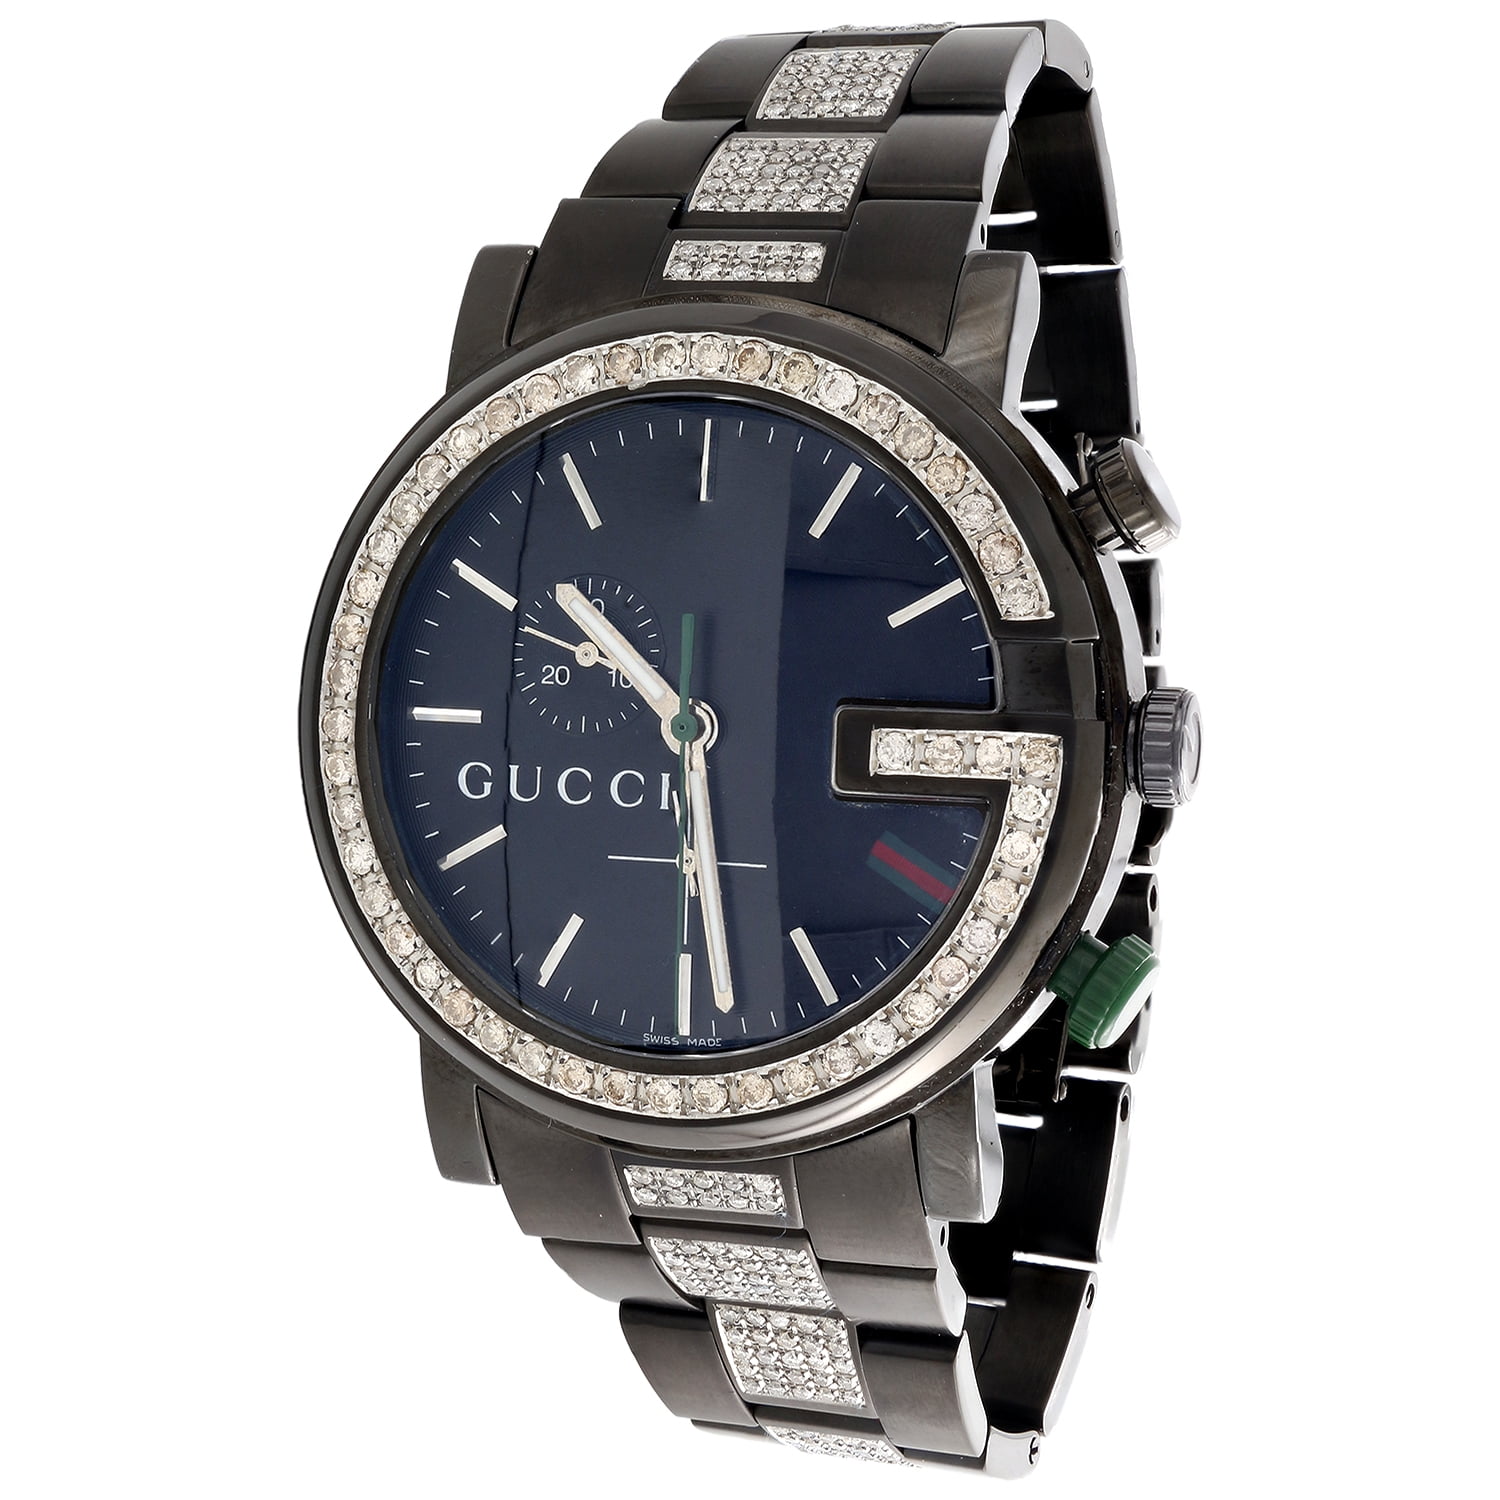 Gucci timepieces